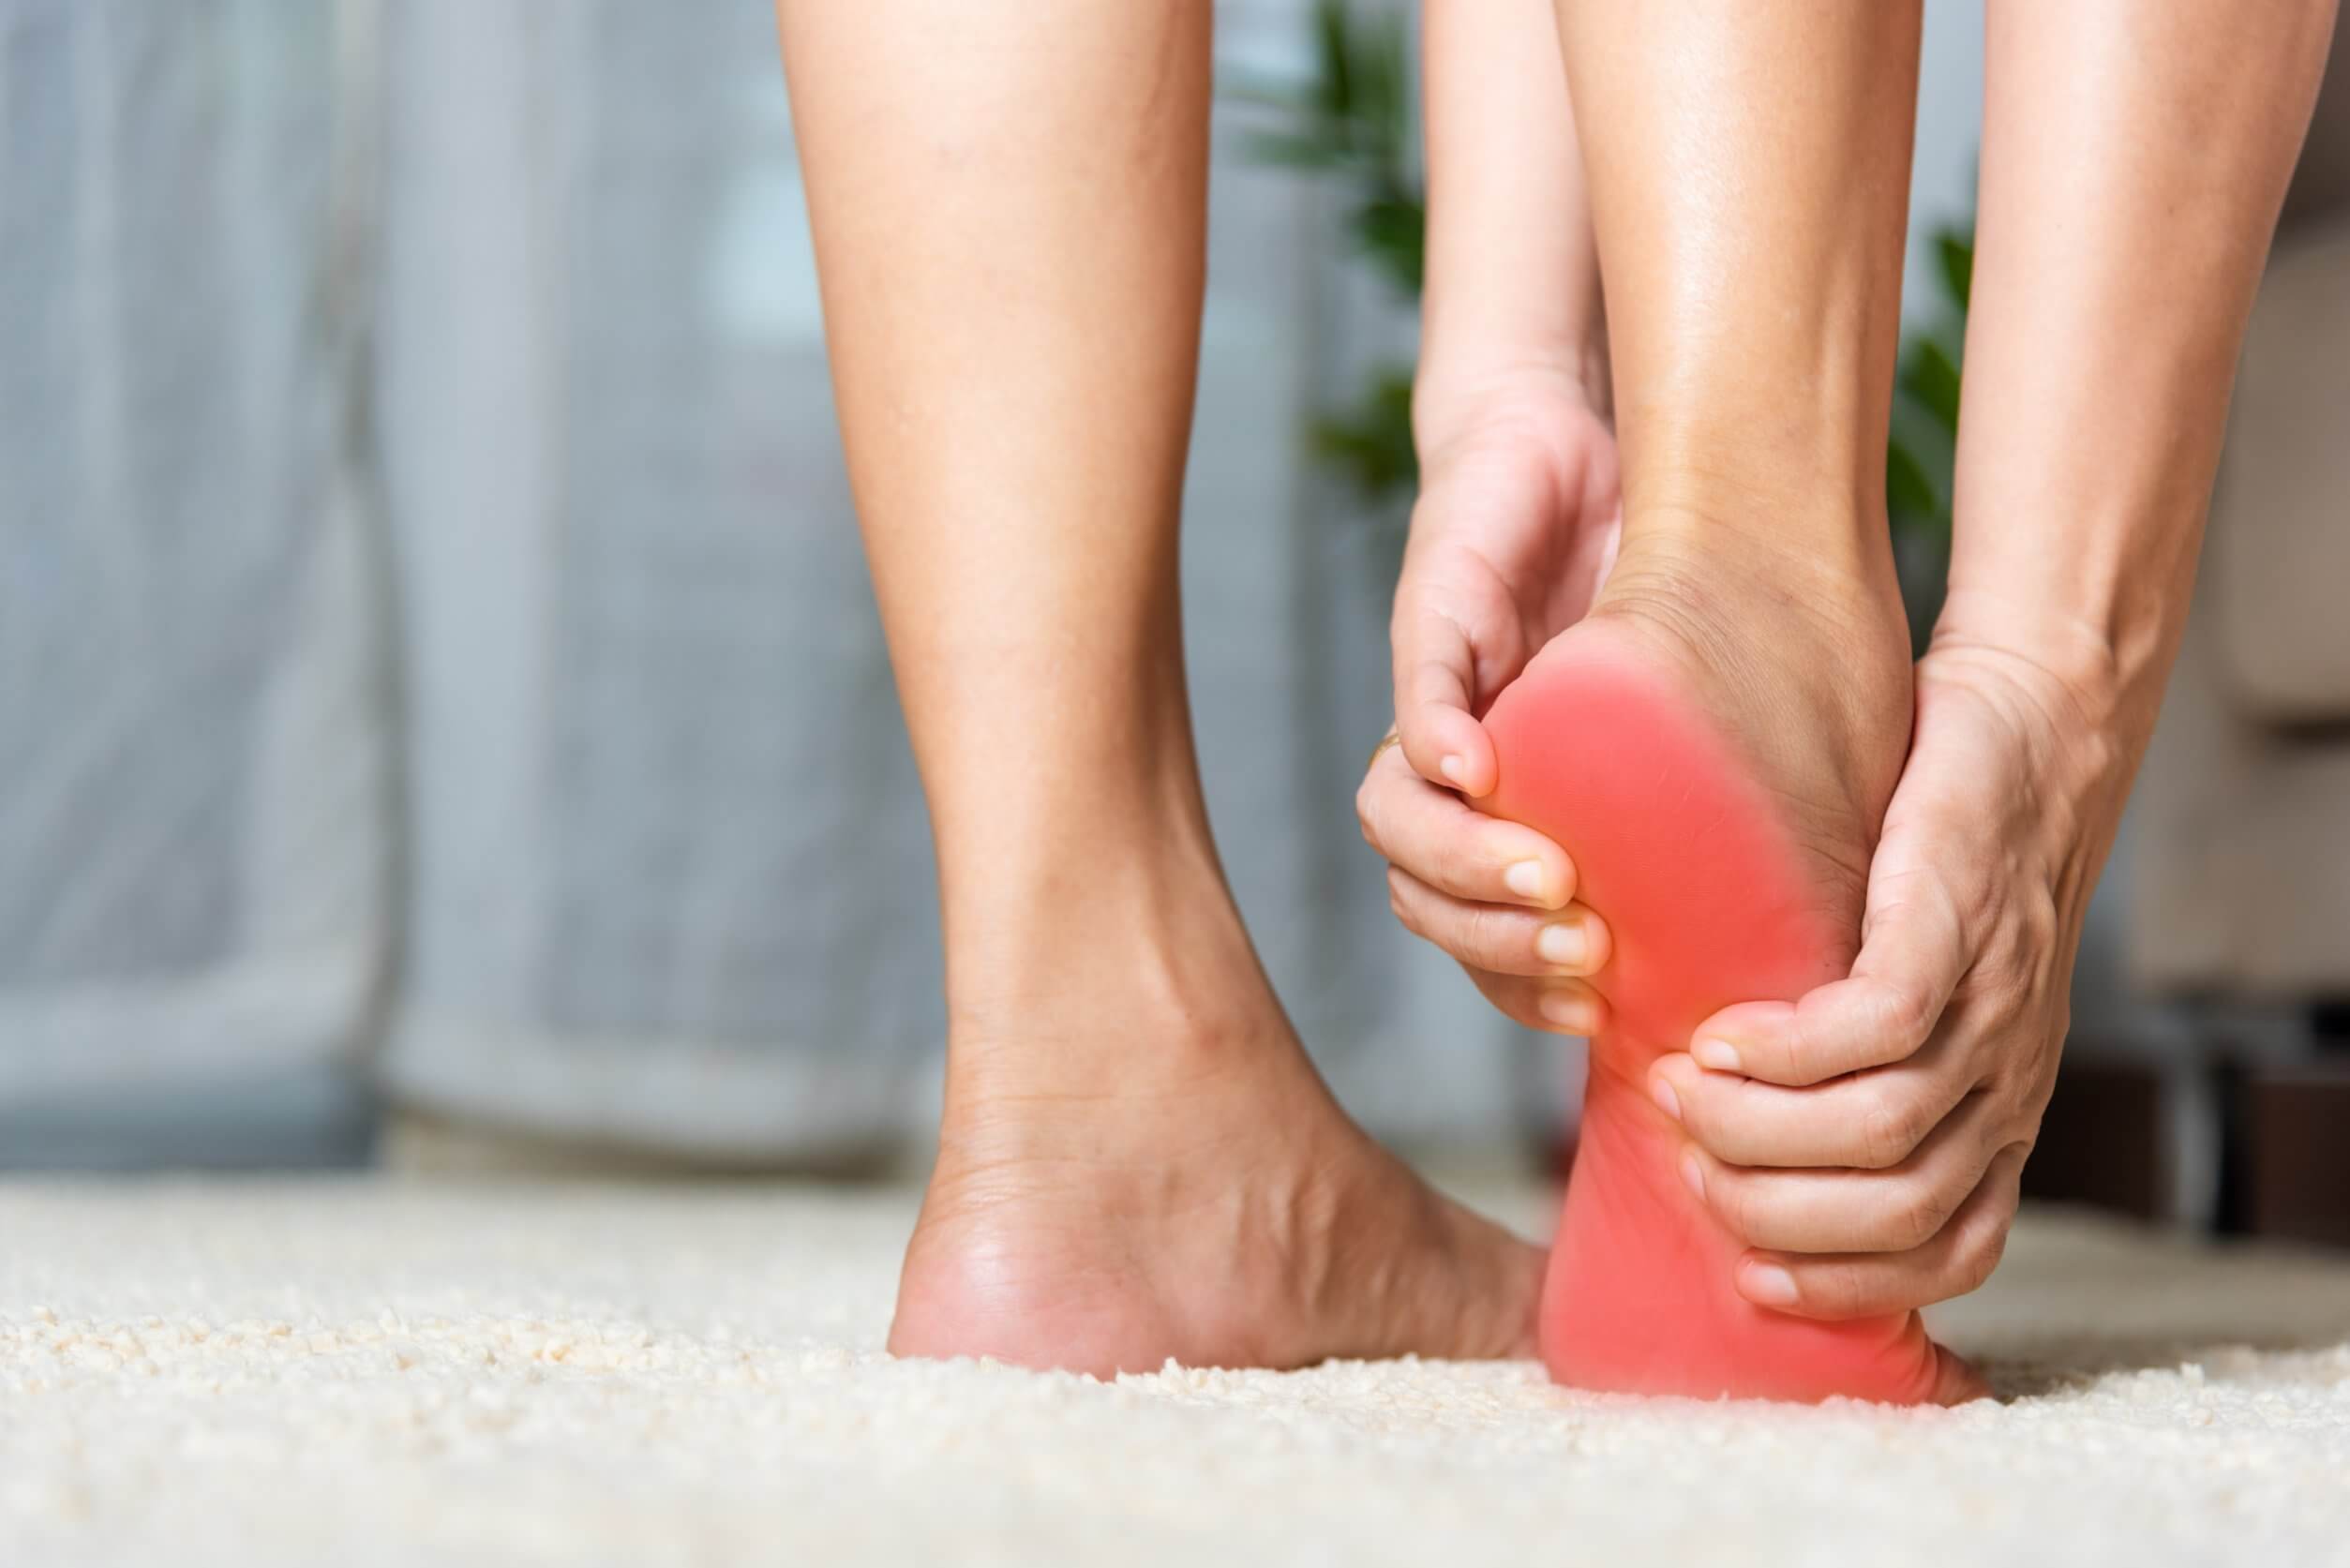 How To Relieve Foot Pain With These 10 Clever Tricks